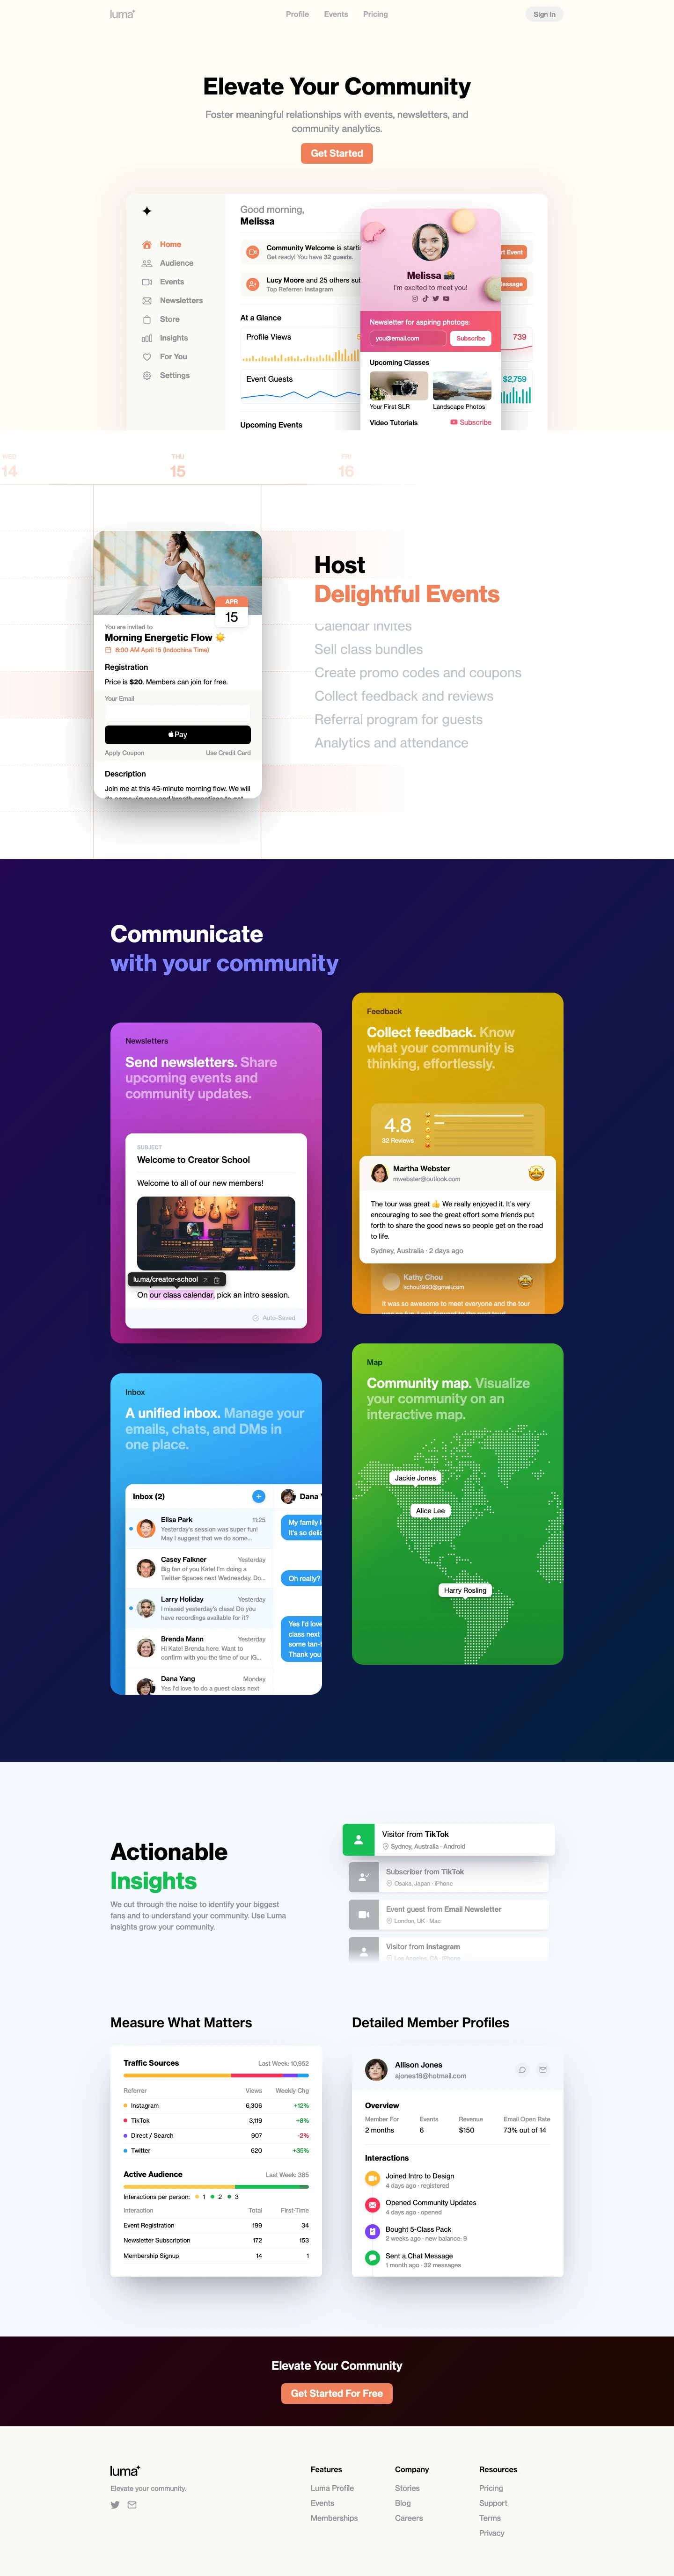 Luma Landing Page Example: Elevate your community. Foster meaningful relationships with events, newsletters, and community analytics.